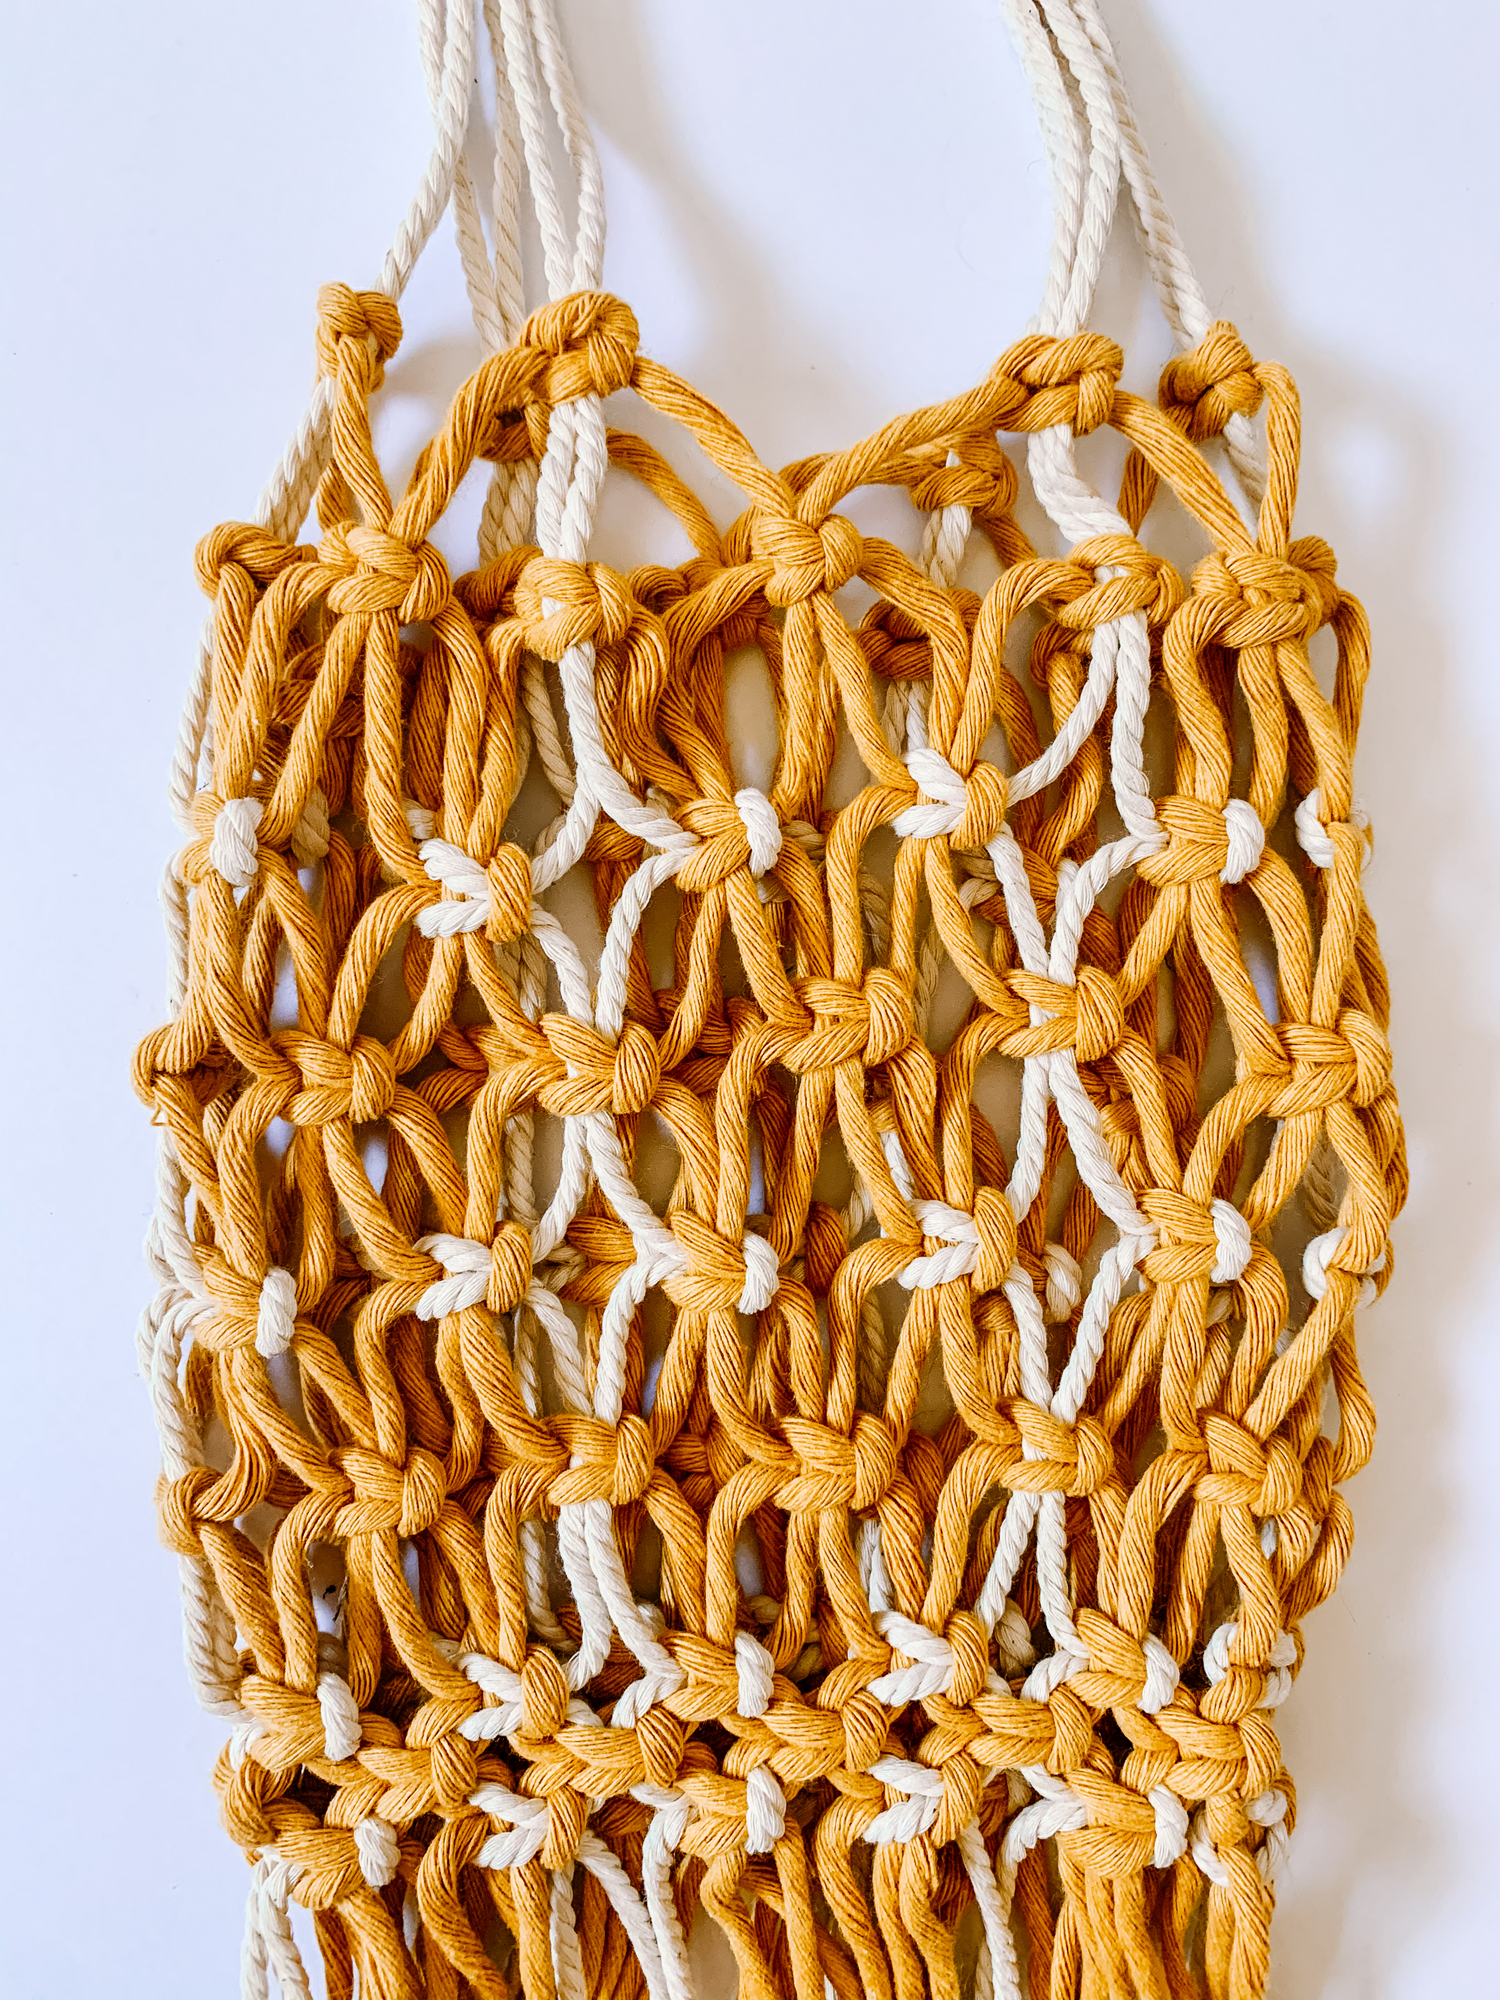 Macrame Bag PDF Pattern - Whiteowlknot's Ko-fi Shop - Ko-fi ❤️ Where  creators get support from fans through donations, memberships, shop sales  and more! The original 'Buy Me a Coffee' Page.